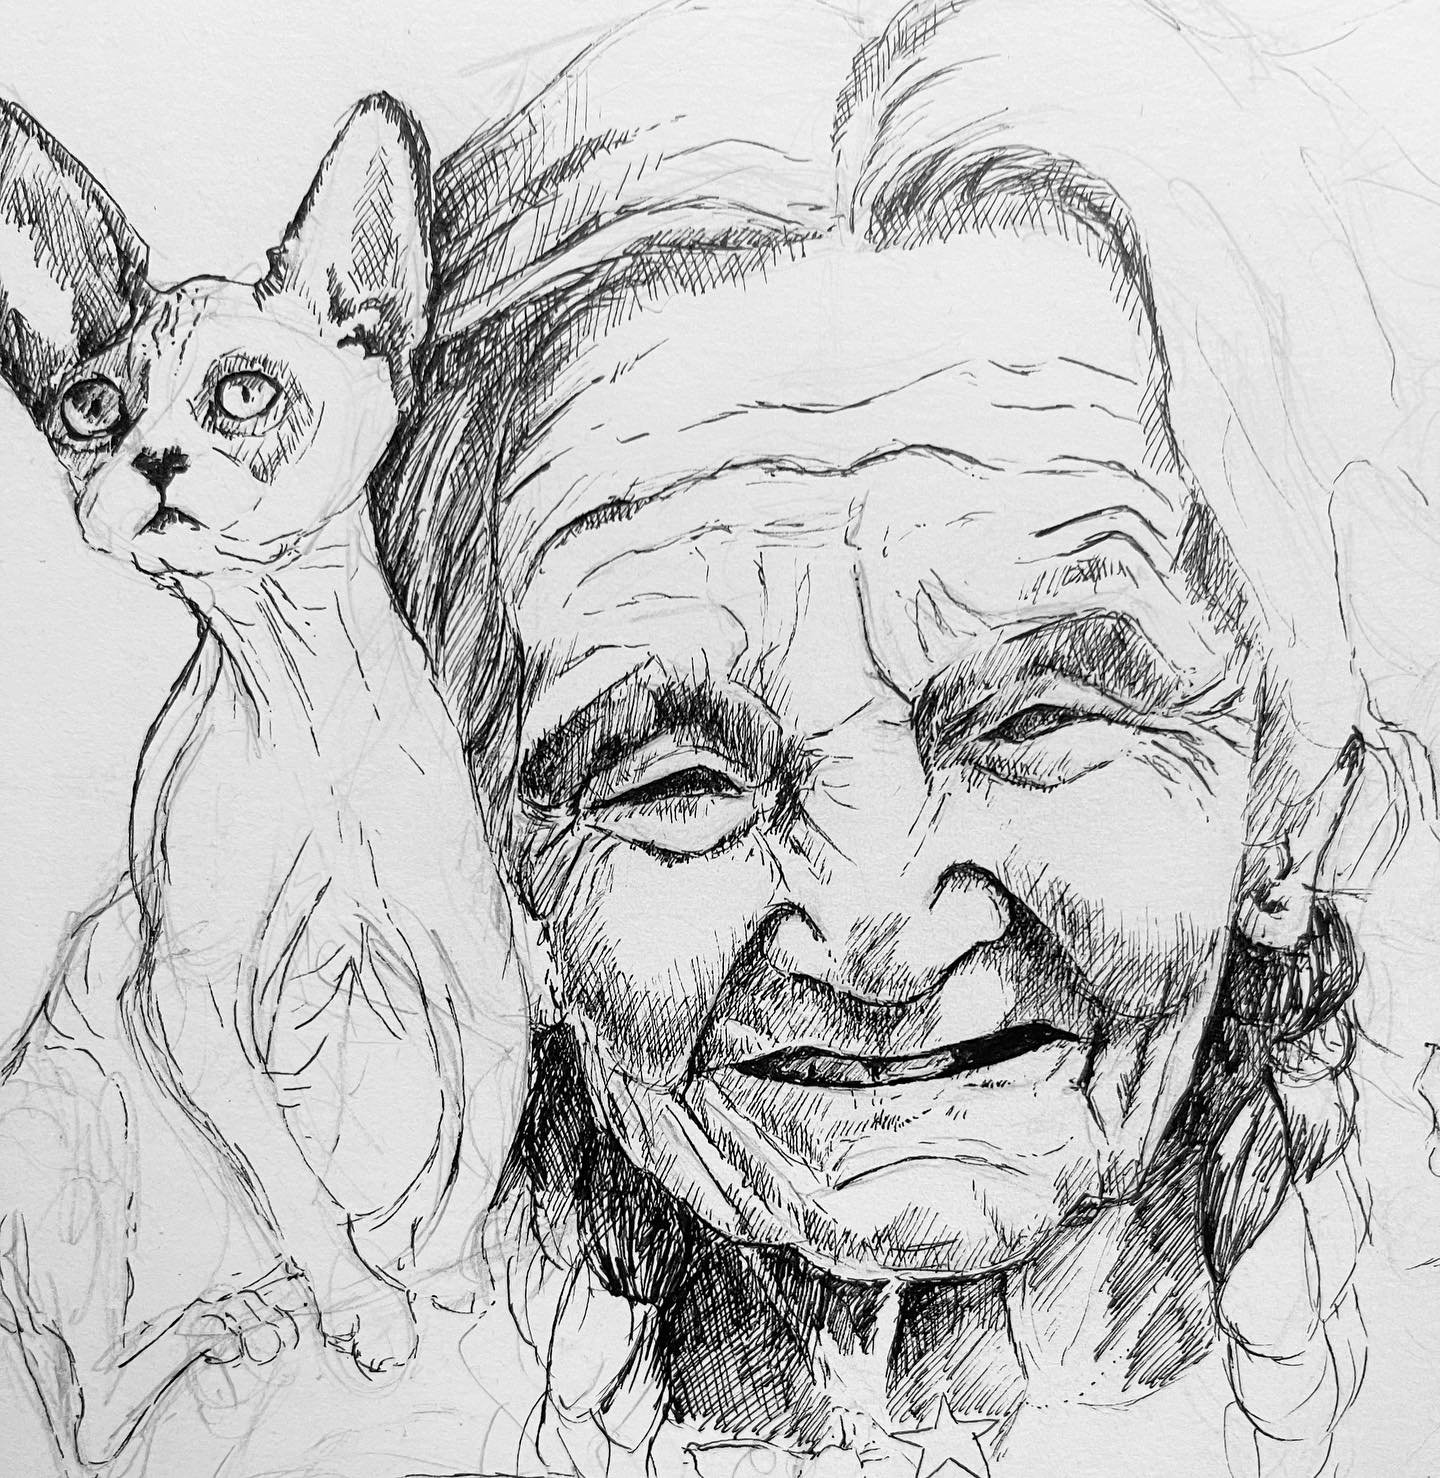 &lsquo;Grandmother Matagot&rsquo; 

A Matagot is a spirit found in French folklore. Usually evil, a Matagot can take the form of many animals frequently cats. You can &lsquo;tame&rsquo; a Matagot with raw chicken apparently but you must always make s